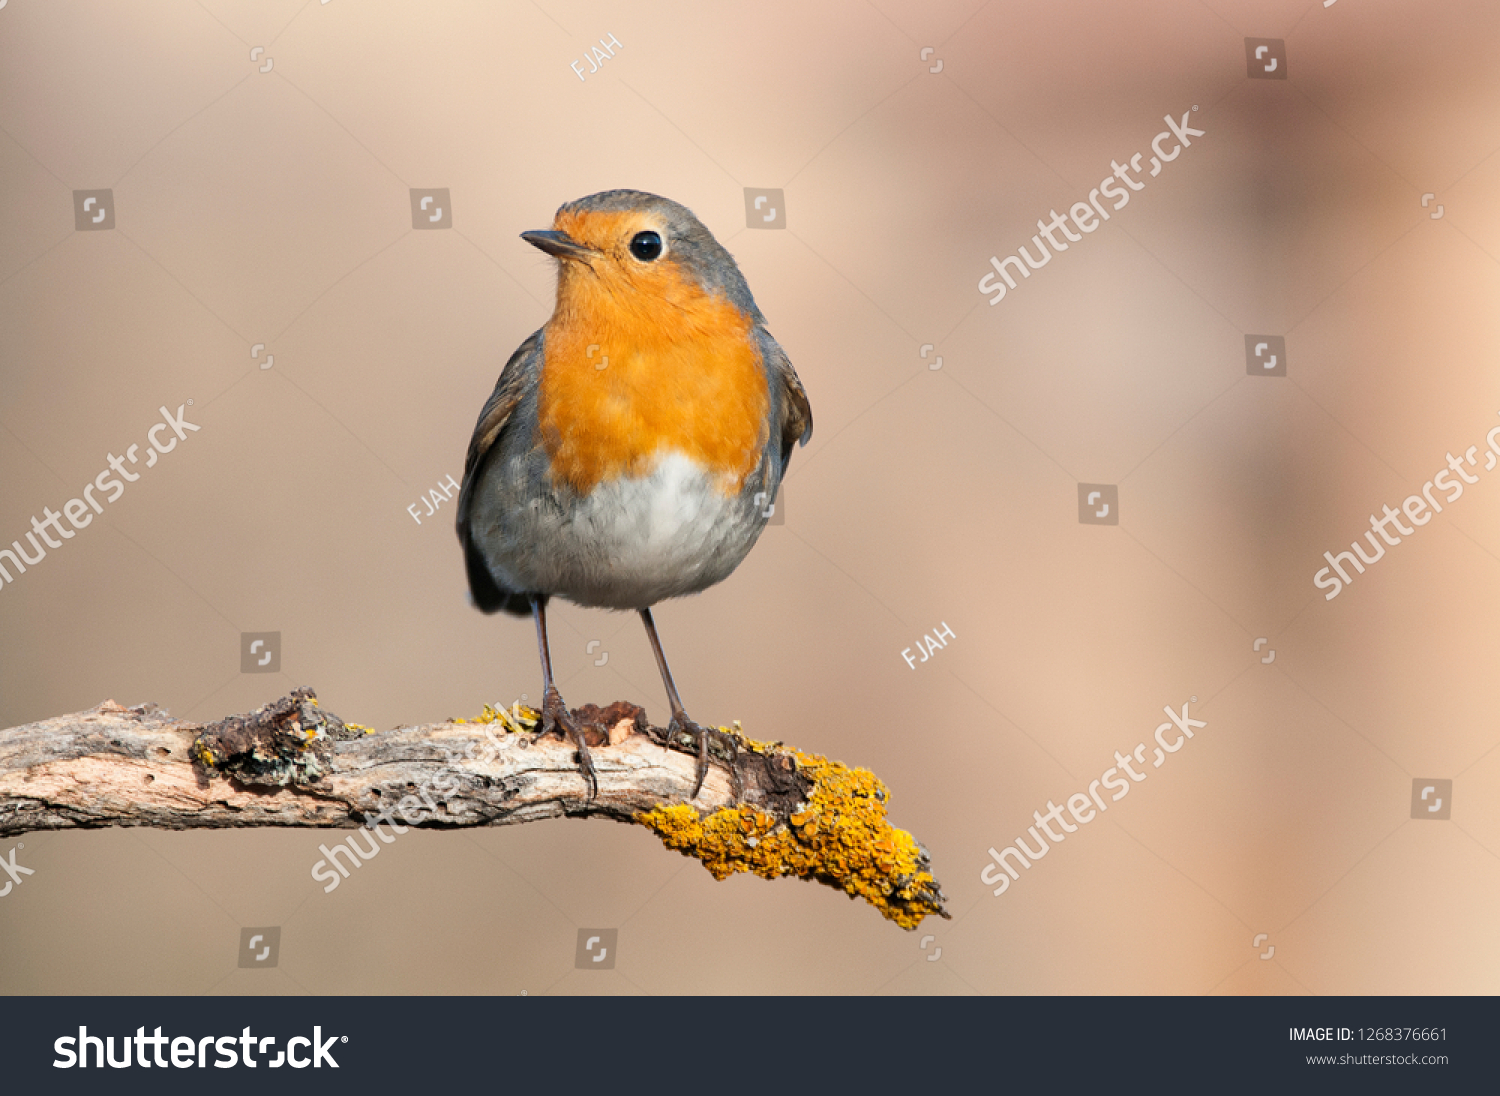 Robin - Erithacus rubecula, standing on a branch #1268376661